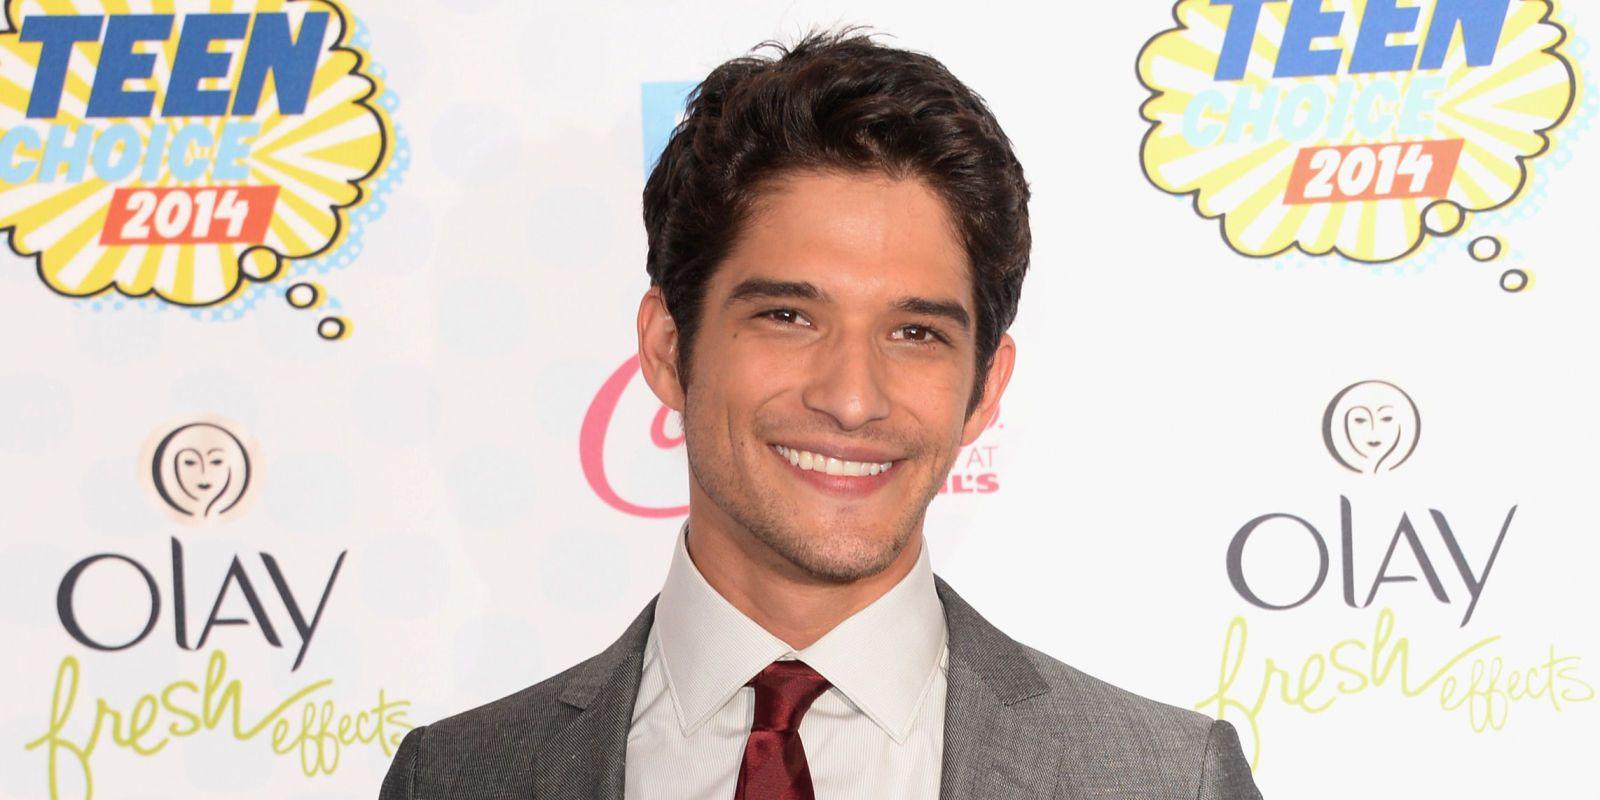 Tyler Posey 'Teen Wolf' Q&A: 'I want five seasons and a movie'